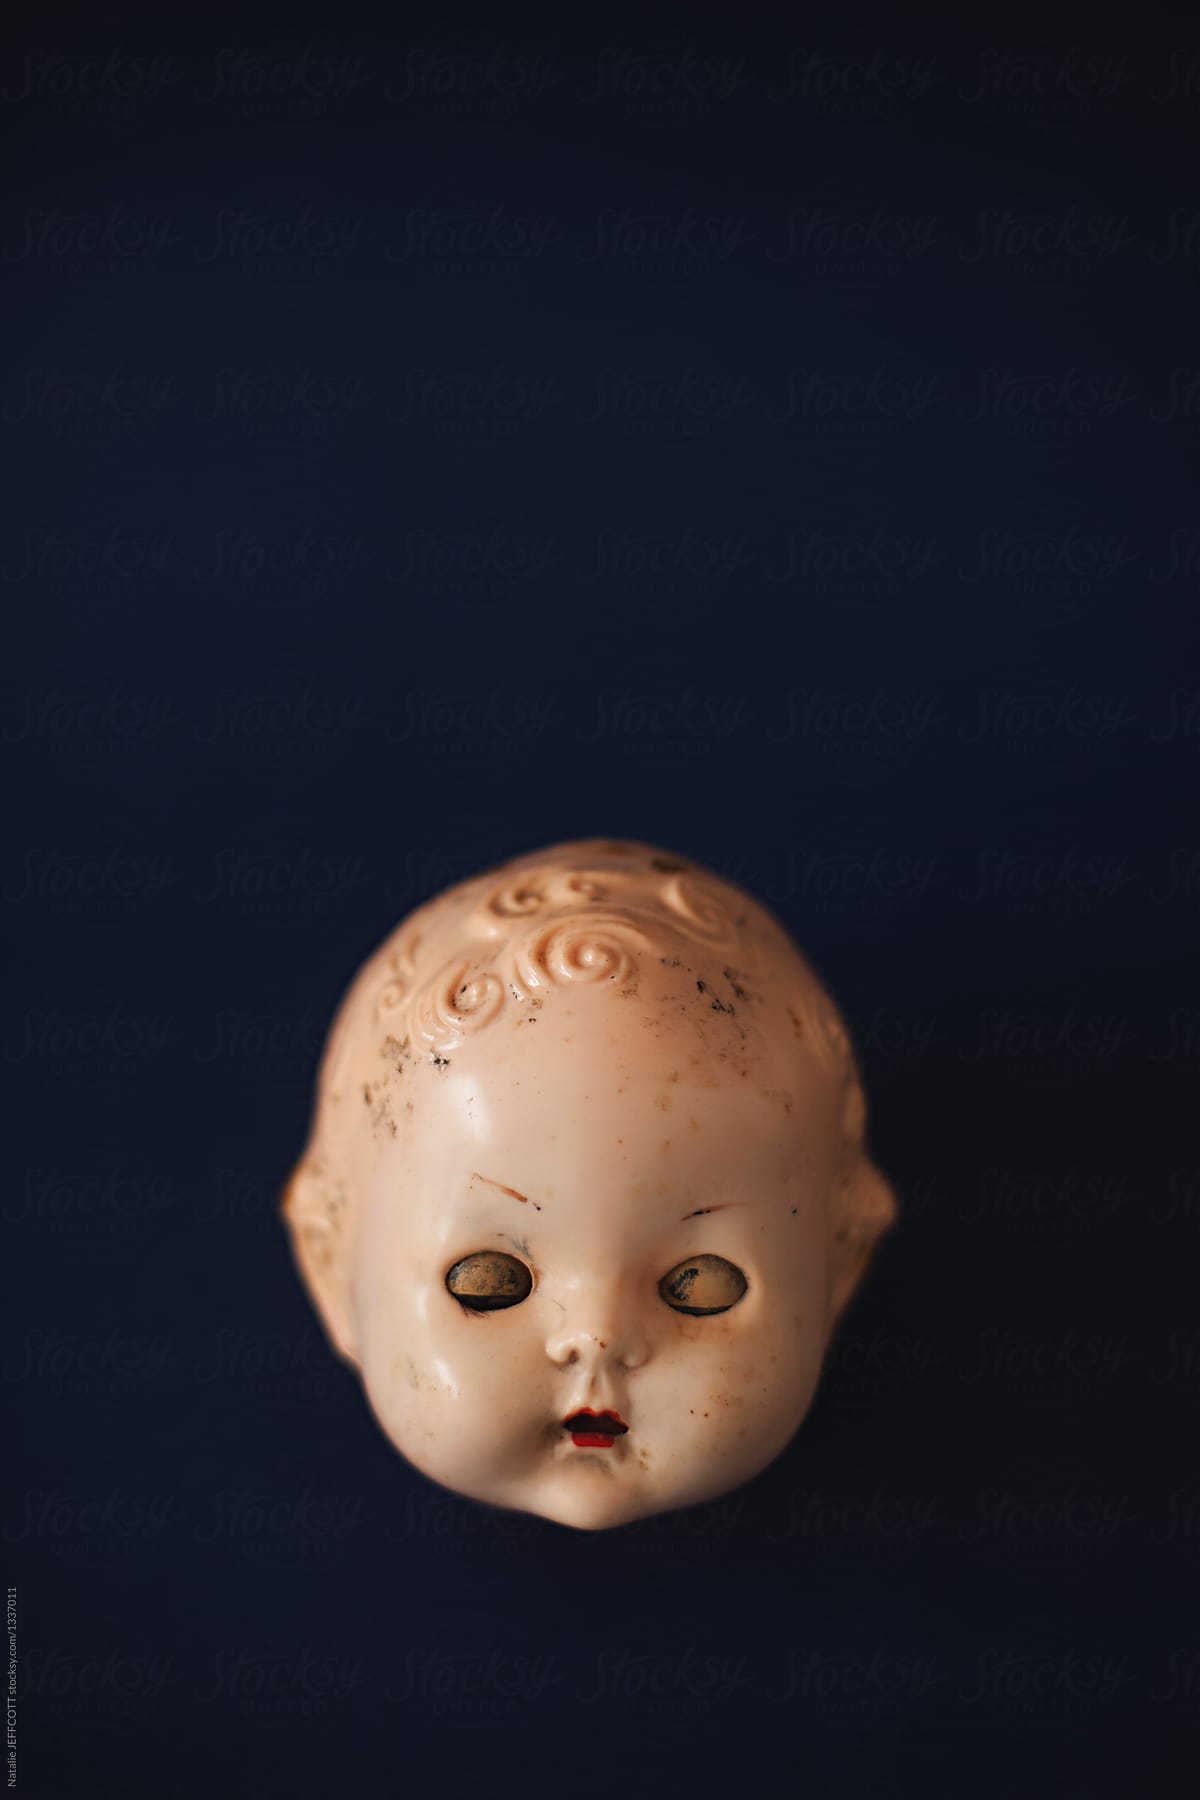 creepy dolls head with eyes closed with copy space